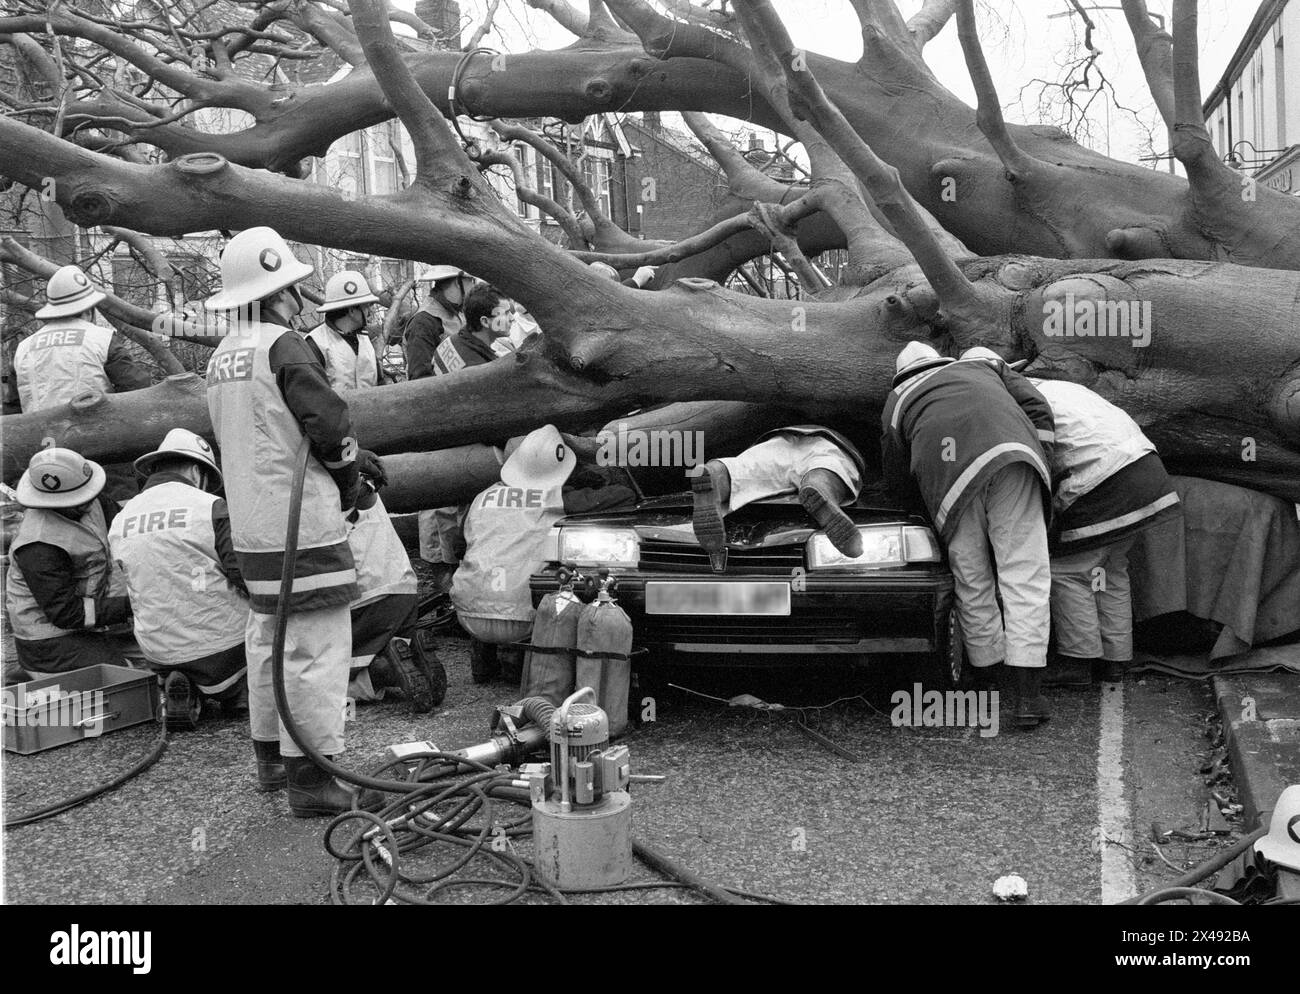 An archive newspaper image of Fire crews and Poilce rushing to save a driver in a car partially crushed under a fallen tree during the great storm in January 1990. Stock Photo